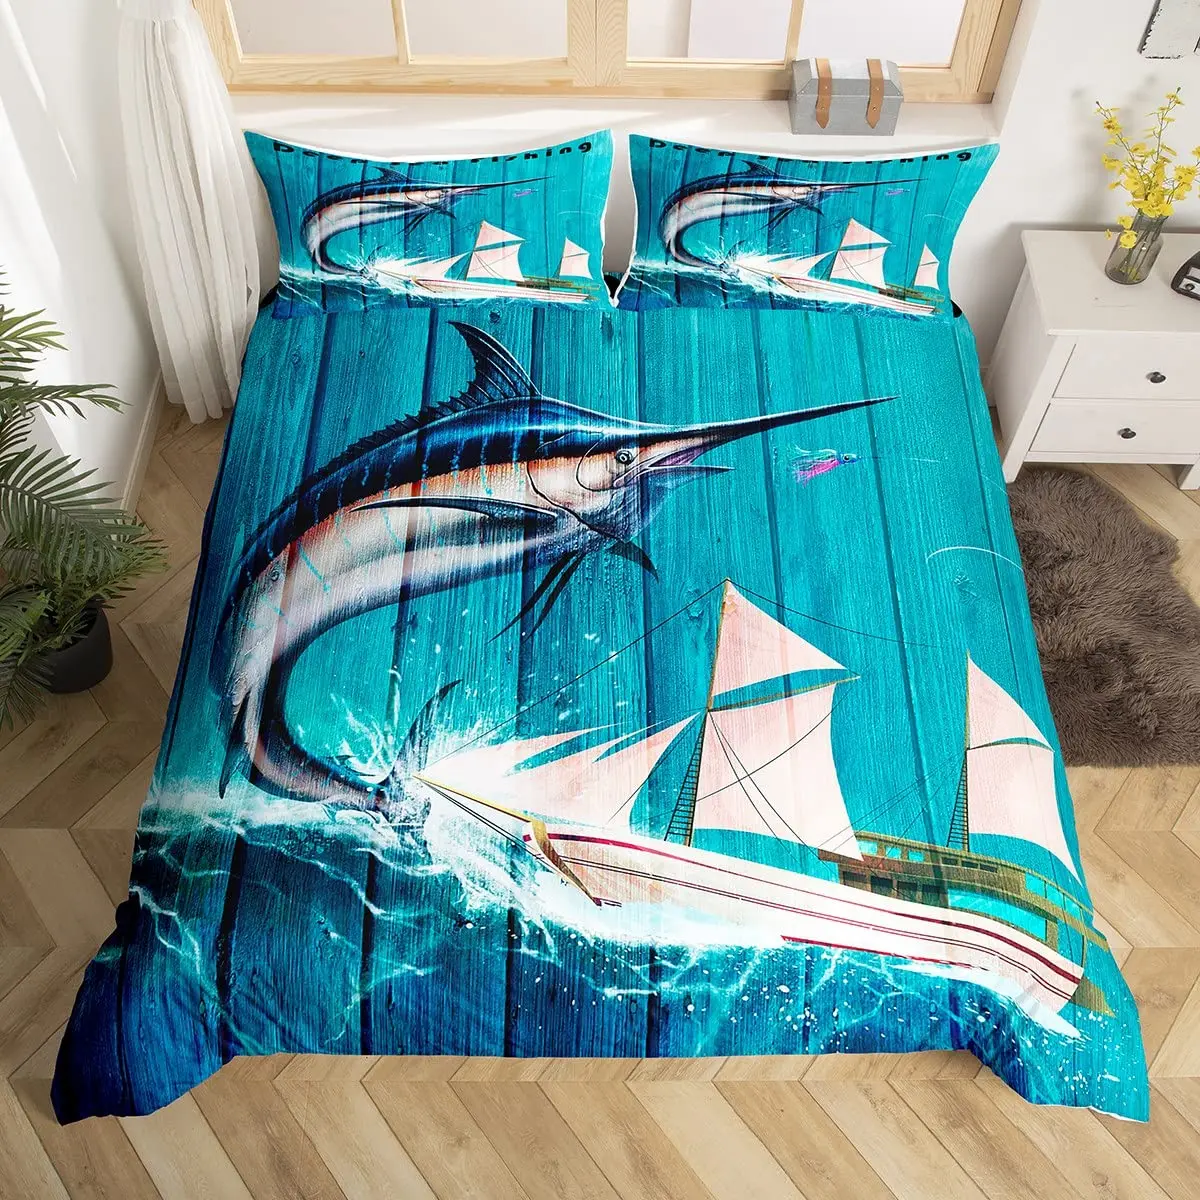  Marlin Swordfish Comforter Cover Fishing Theme Duvet Cover  Nautical Deep Sea Fish Bedding Set For Kids Boys Girls Seafood Fishermen  Quilt Cover Bedroom Decor With 2 Pillow Cases Queen Size Blue 